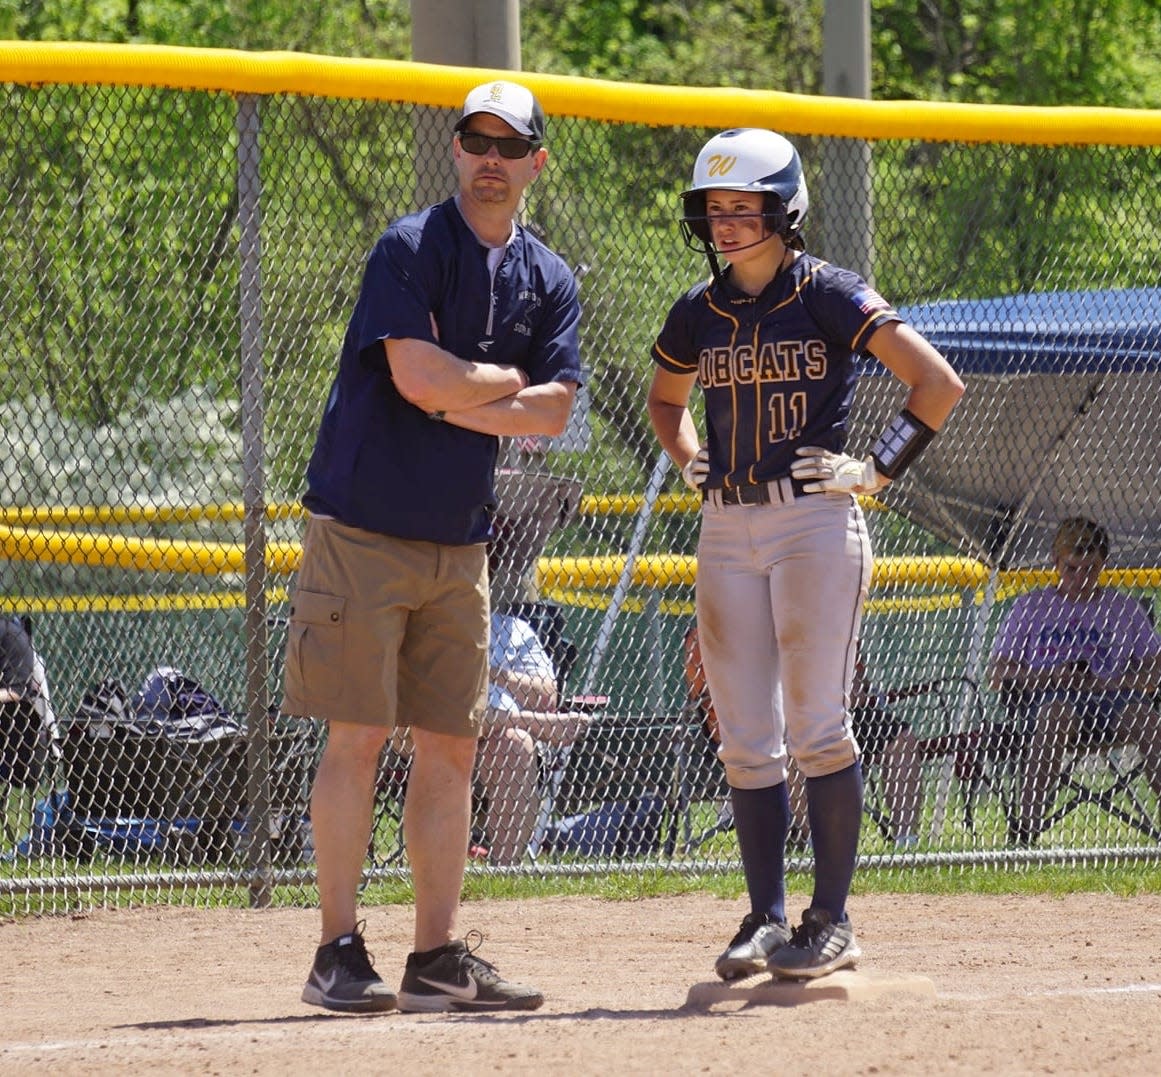 Whiteford coach Matt VanBrandt confers with his daughter Aly VanBrandt during the Michigan Challenge Tournament Sunday. Whiteford took second place in the 40-team tournament that featured many of the top teams in the state.